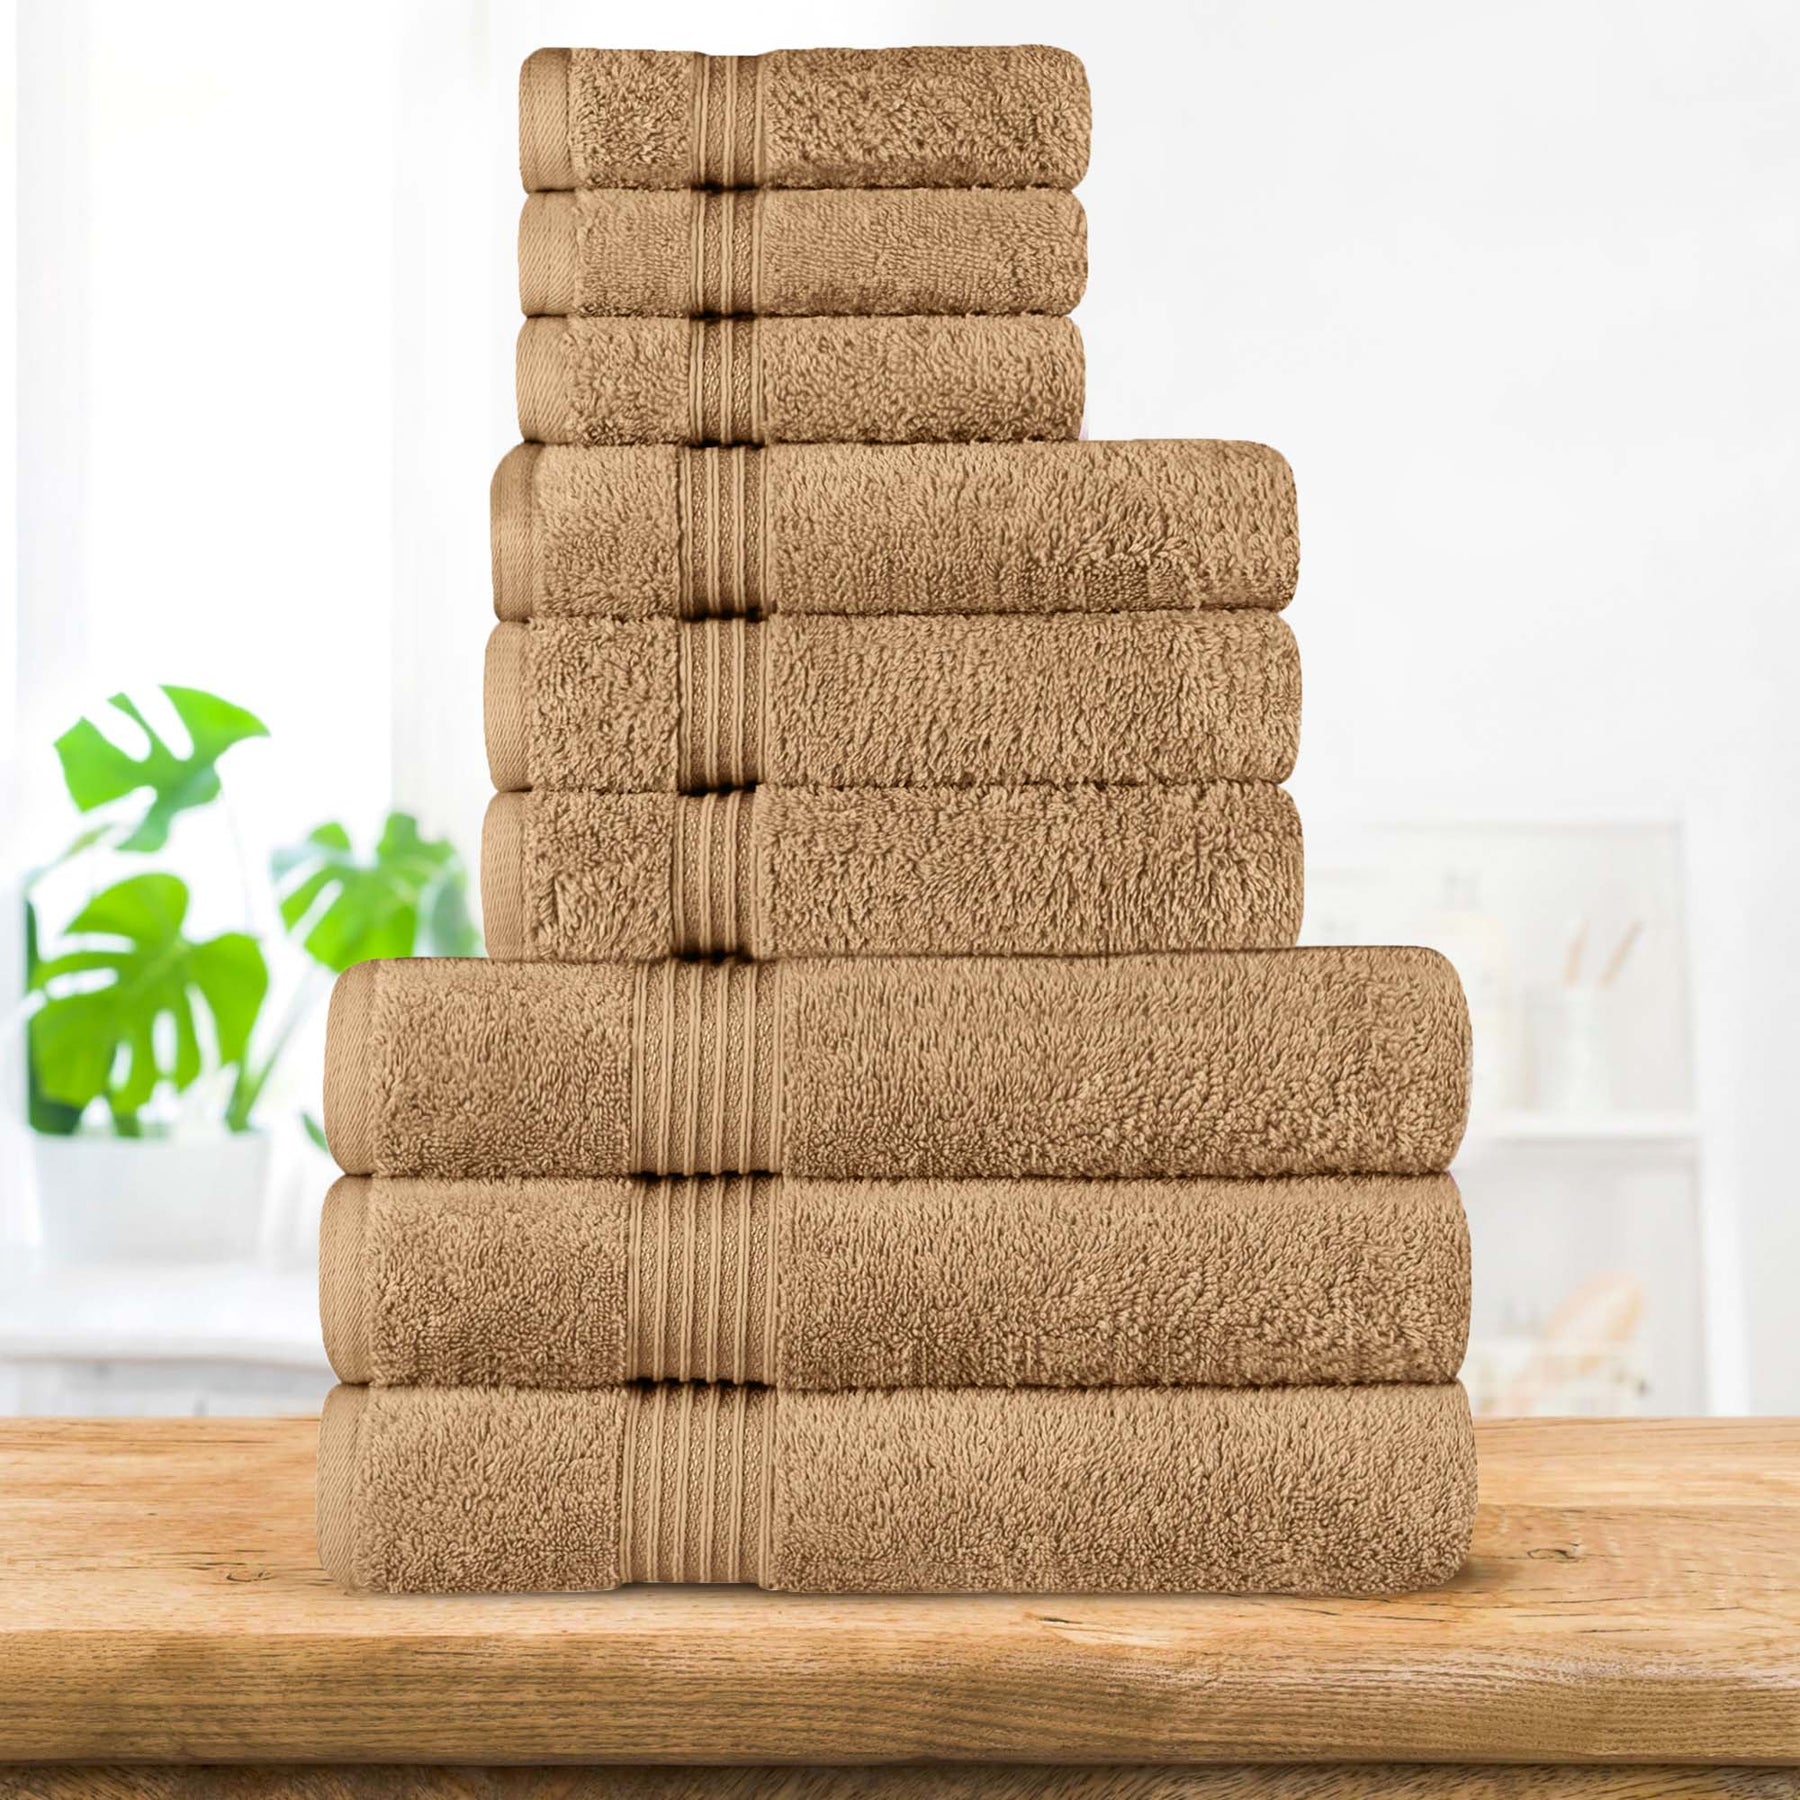 Egyptian Cotton Highly Absorbent Solid 9 Piece Ultra Soft Towel Set - Toast